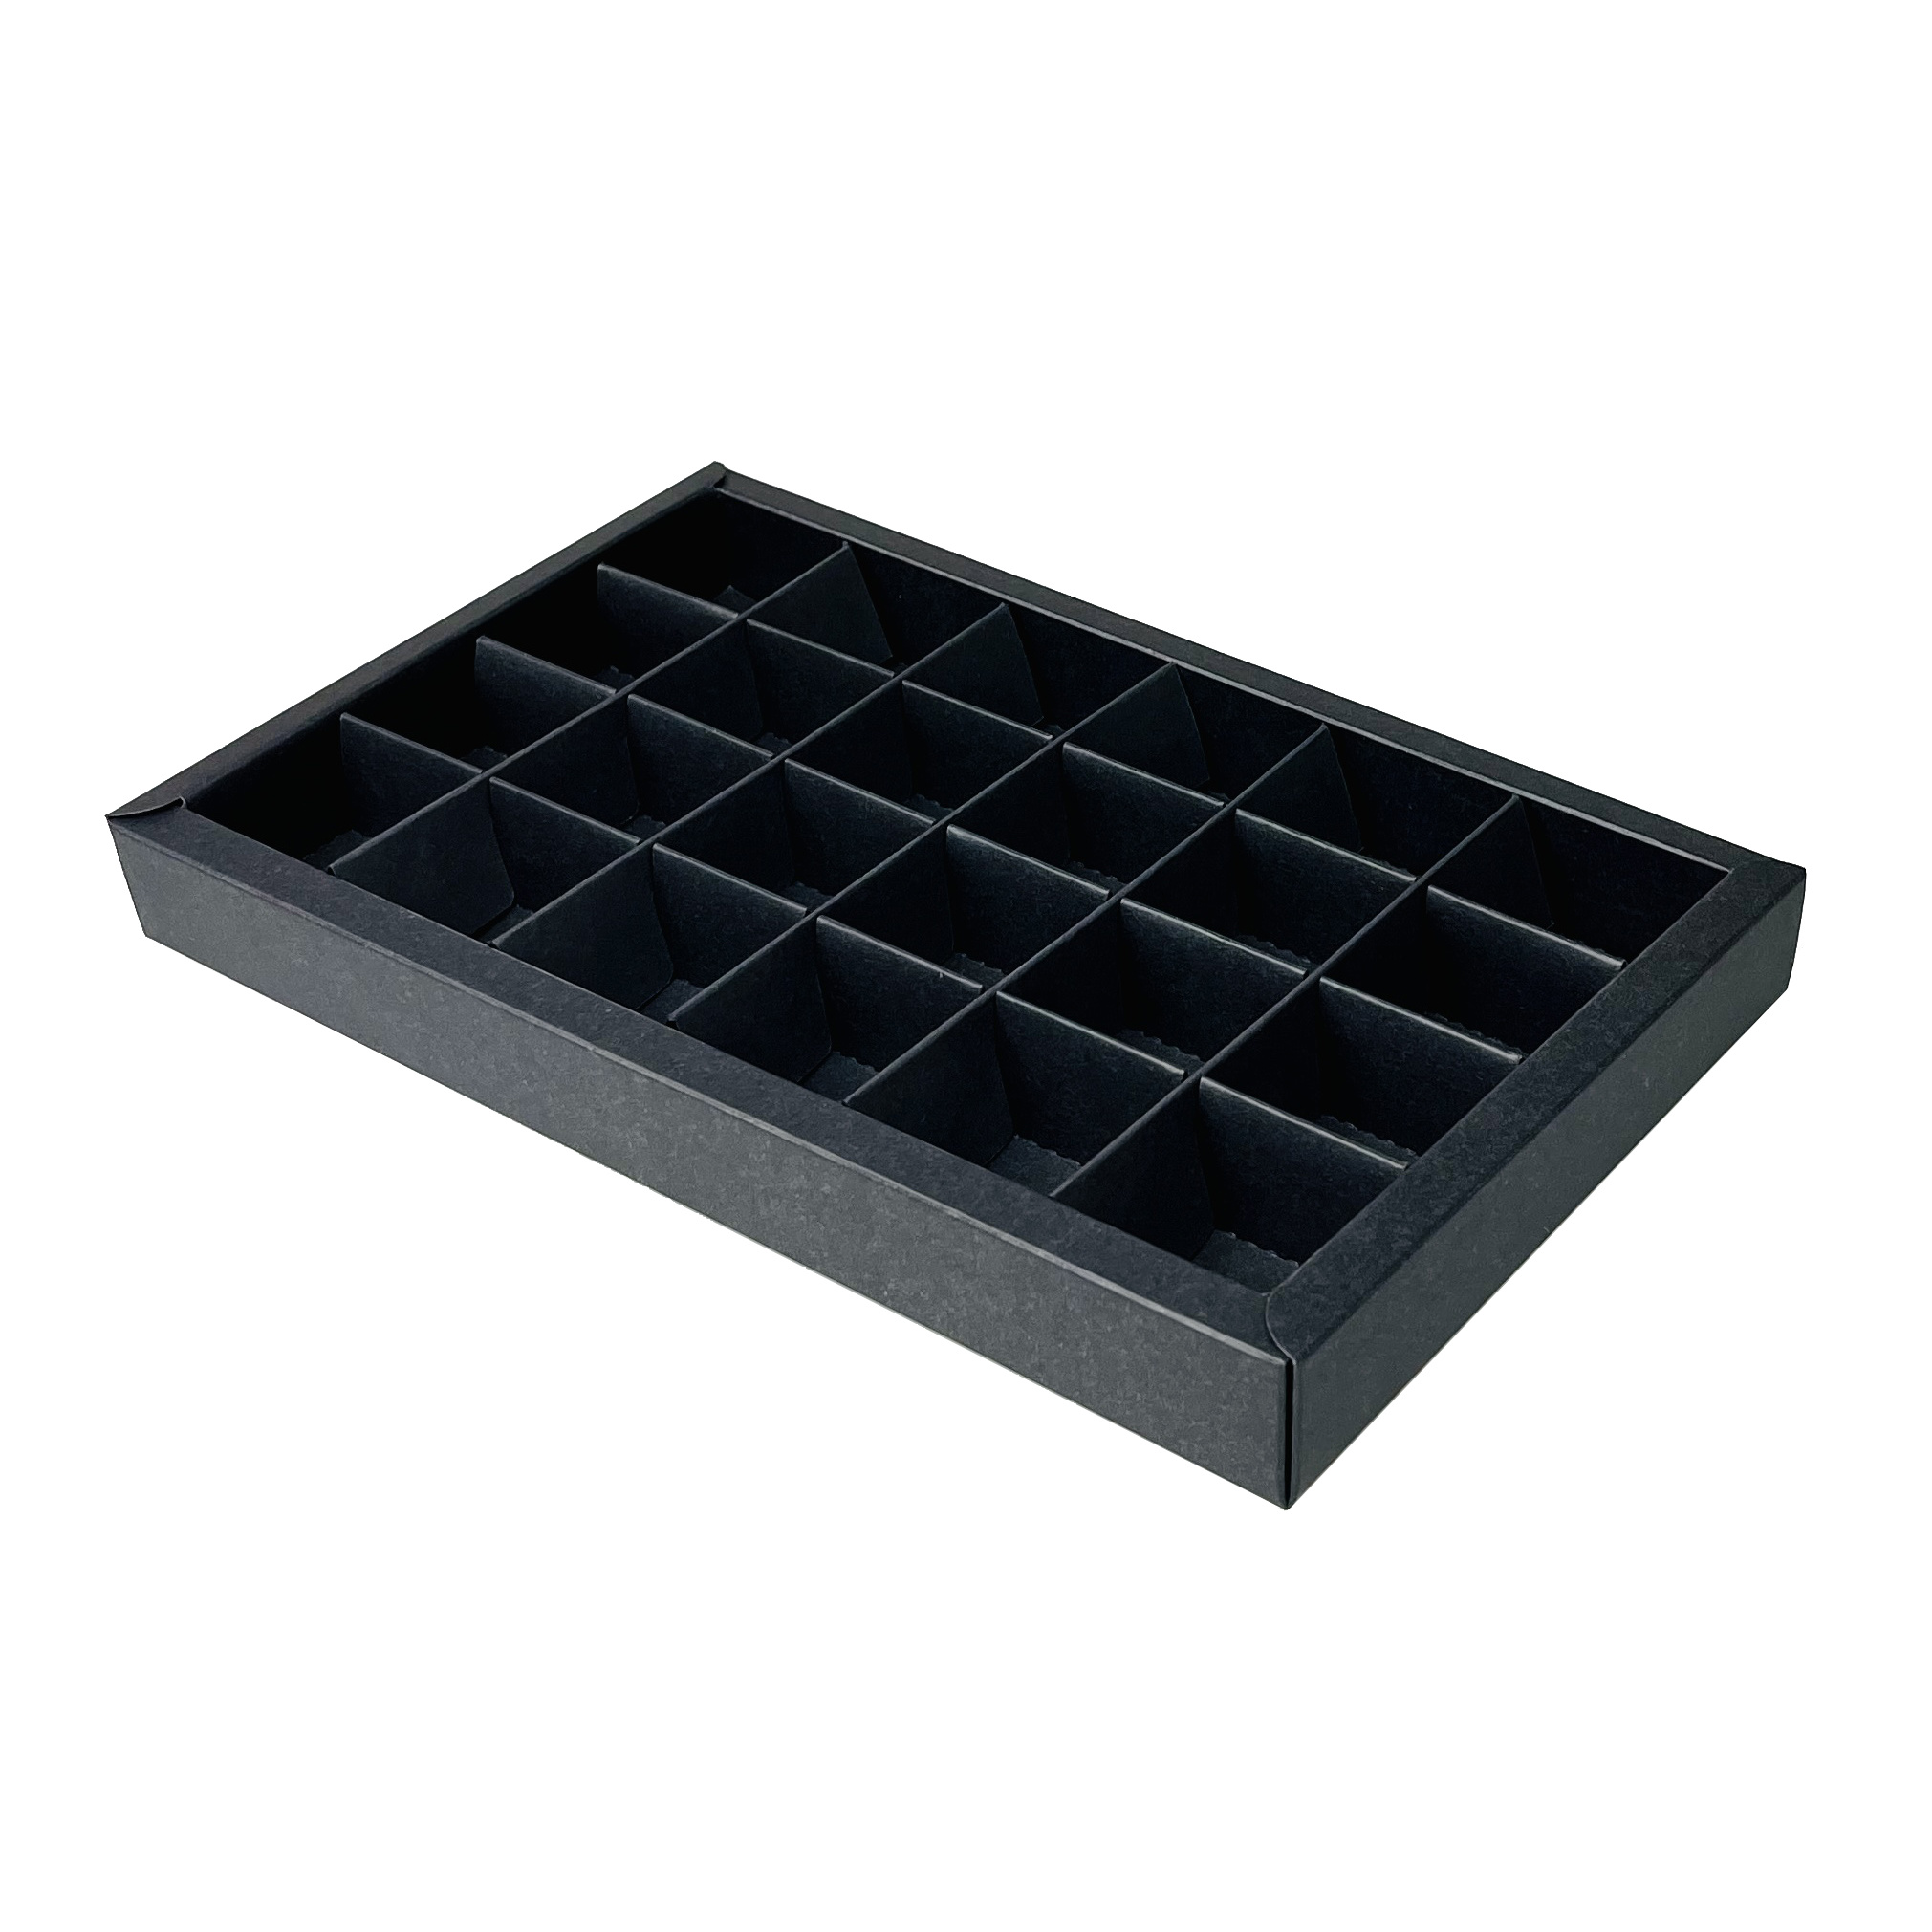 Black window box with interior for 24 chocolates - 240*140*25 mm - 18 pieces